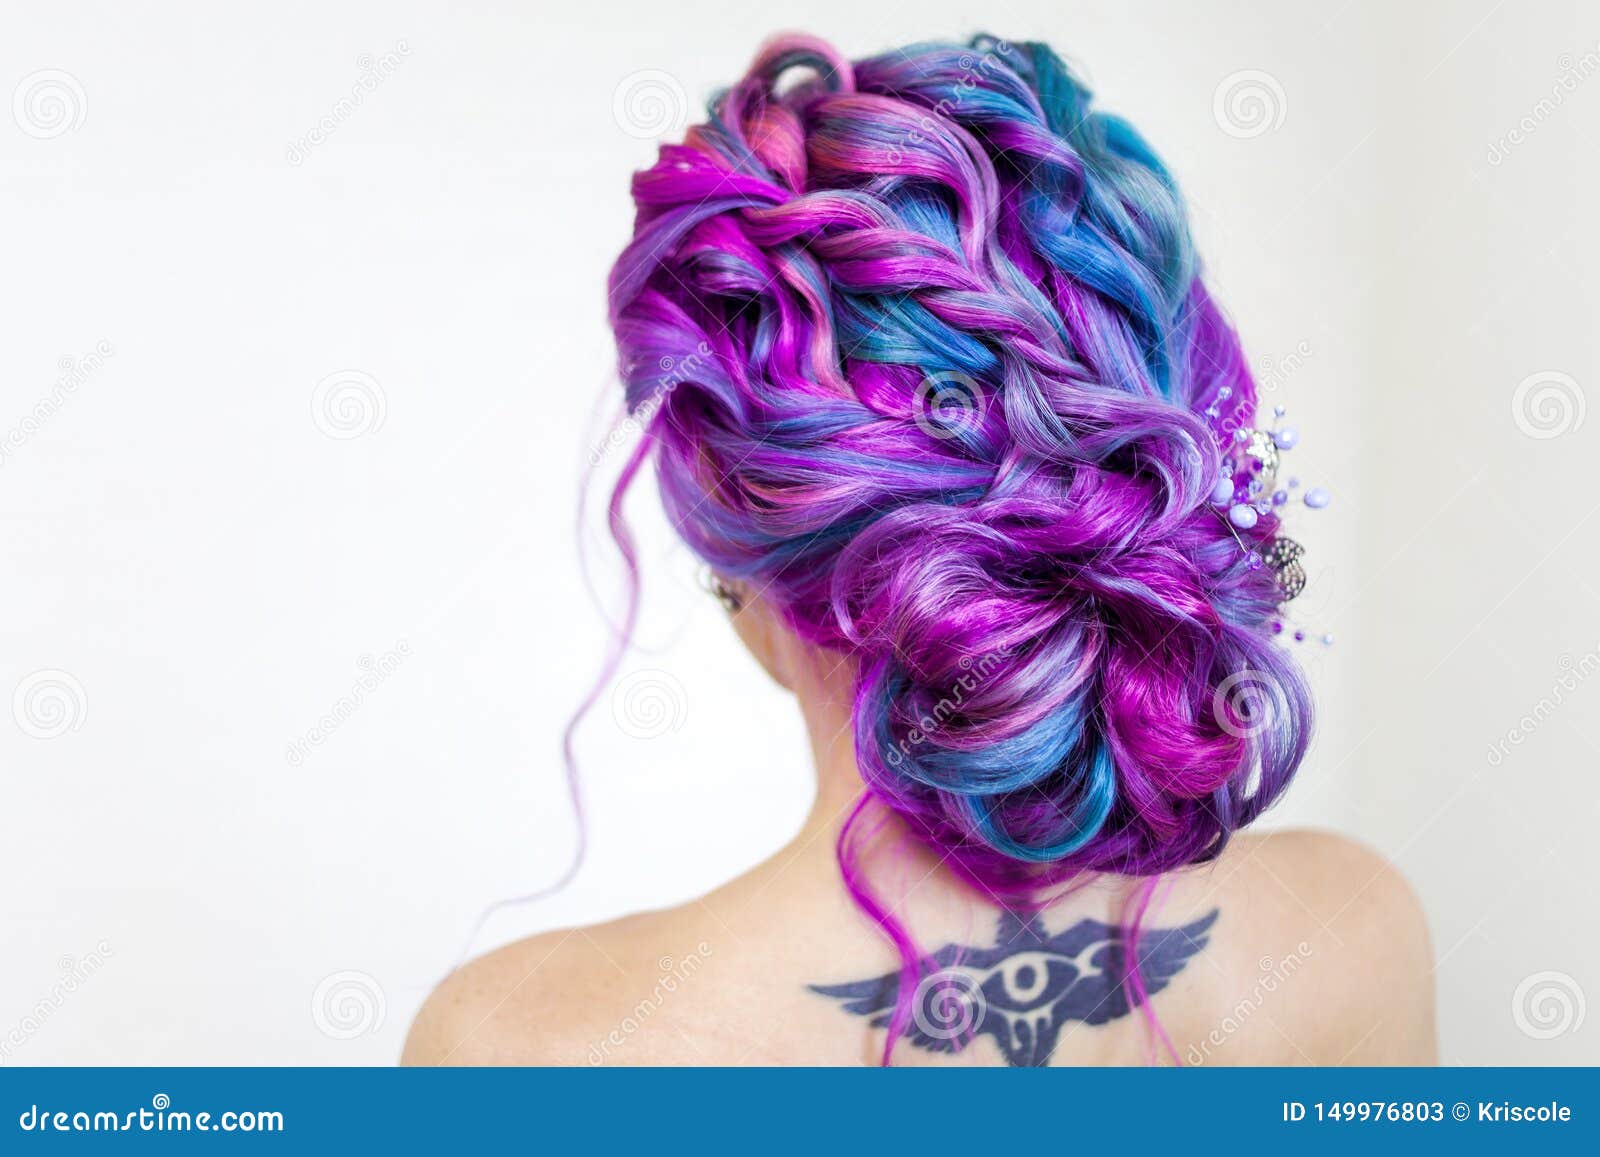 LoveHairStyles.com - wide 4